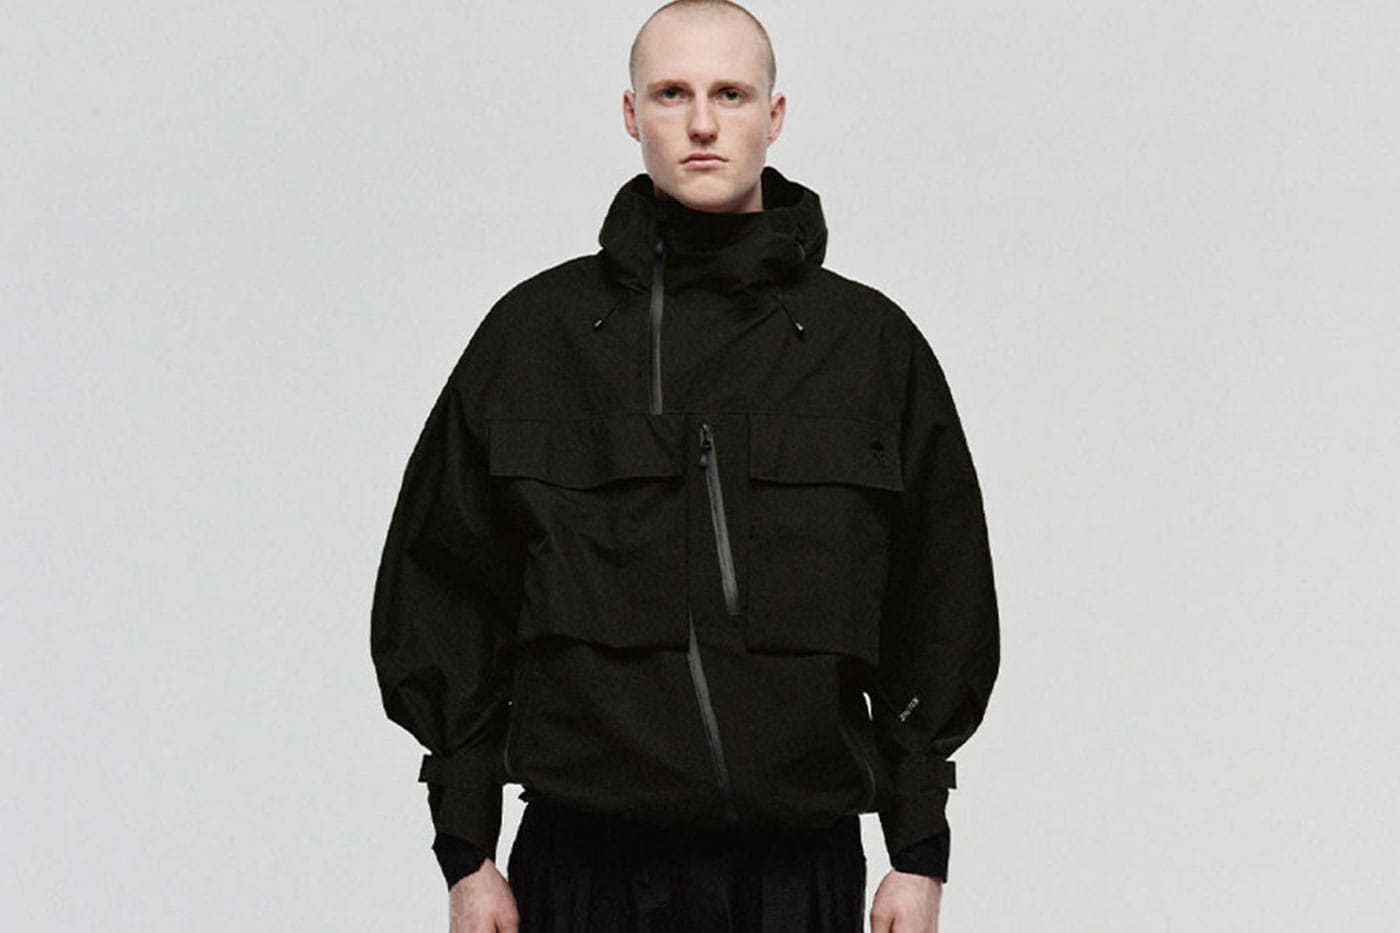 D-VEC Teams Up with ALMOSTBLACK for GORE-TEX Utilitarian Wear